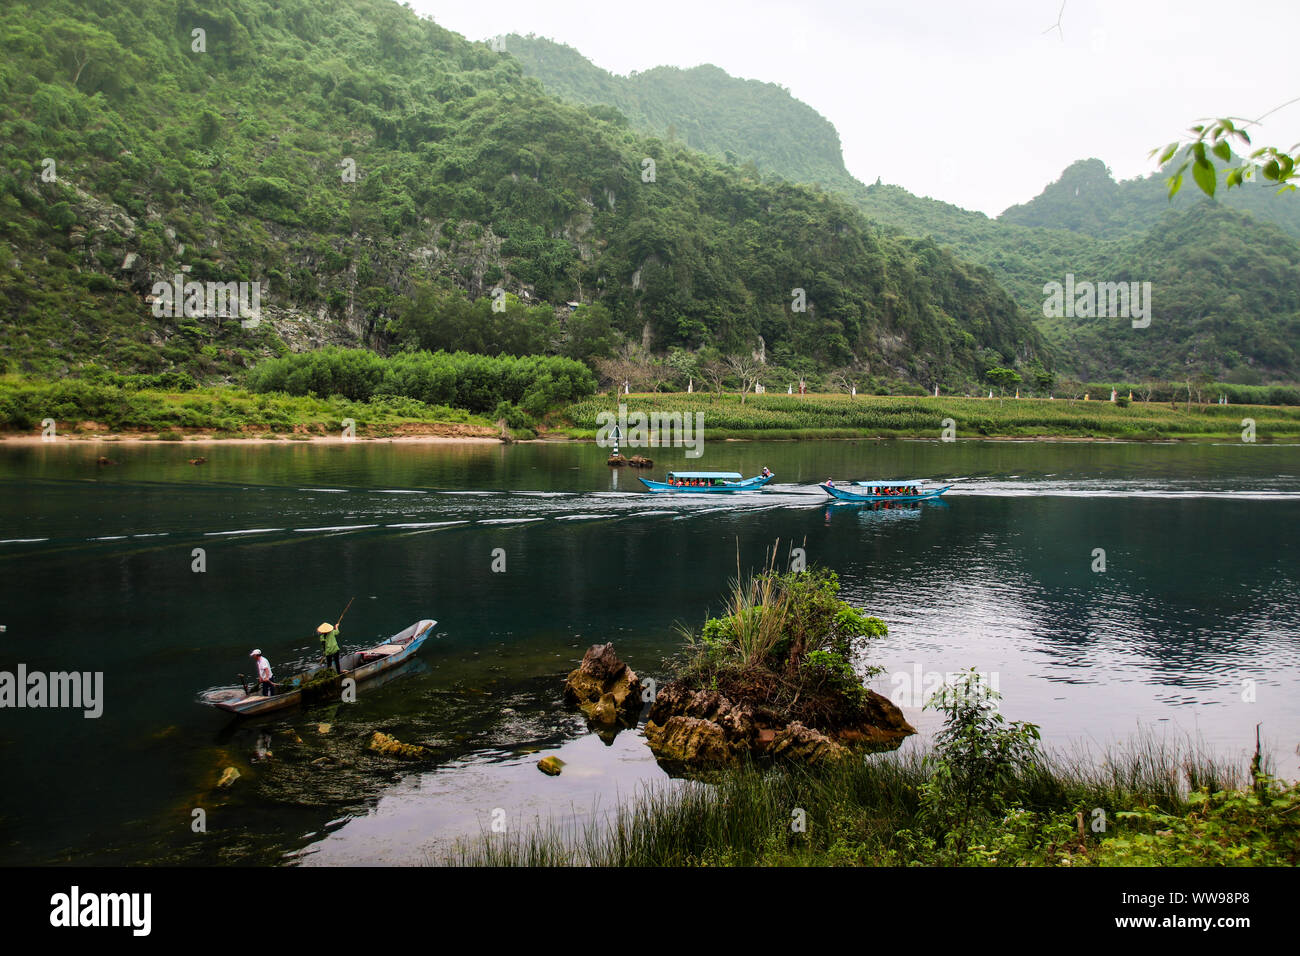 Scenic view of Son River with tour boats in Phong nha, Vietnam. A popular travel destination famous for pristine nature and wilderness Stock Photo